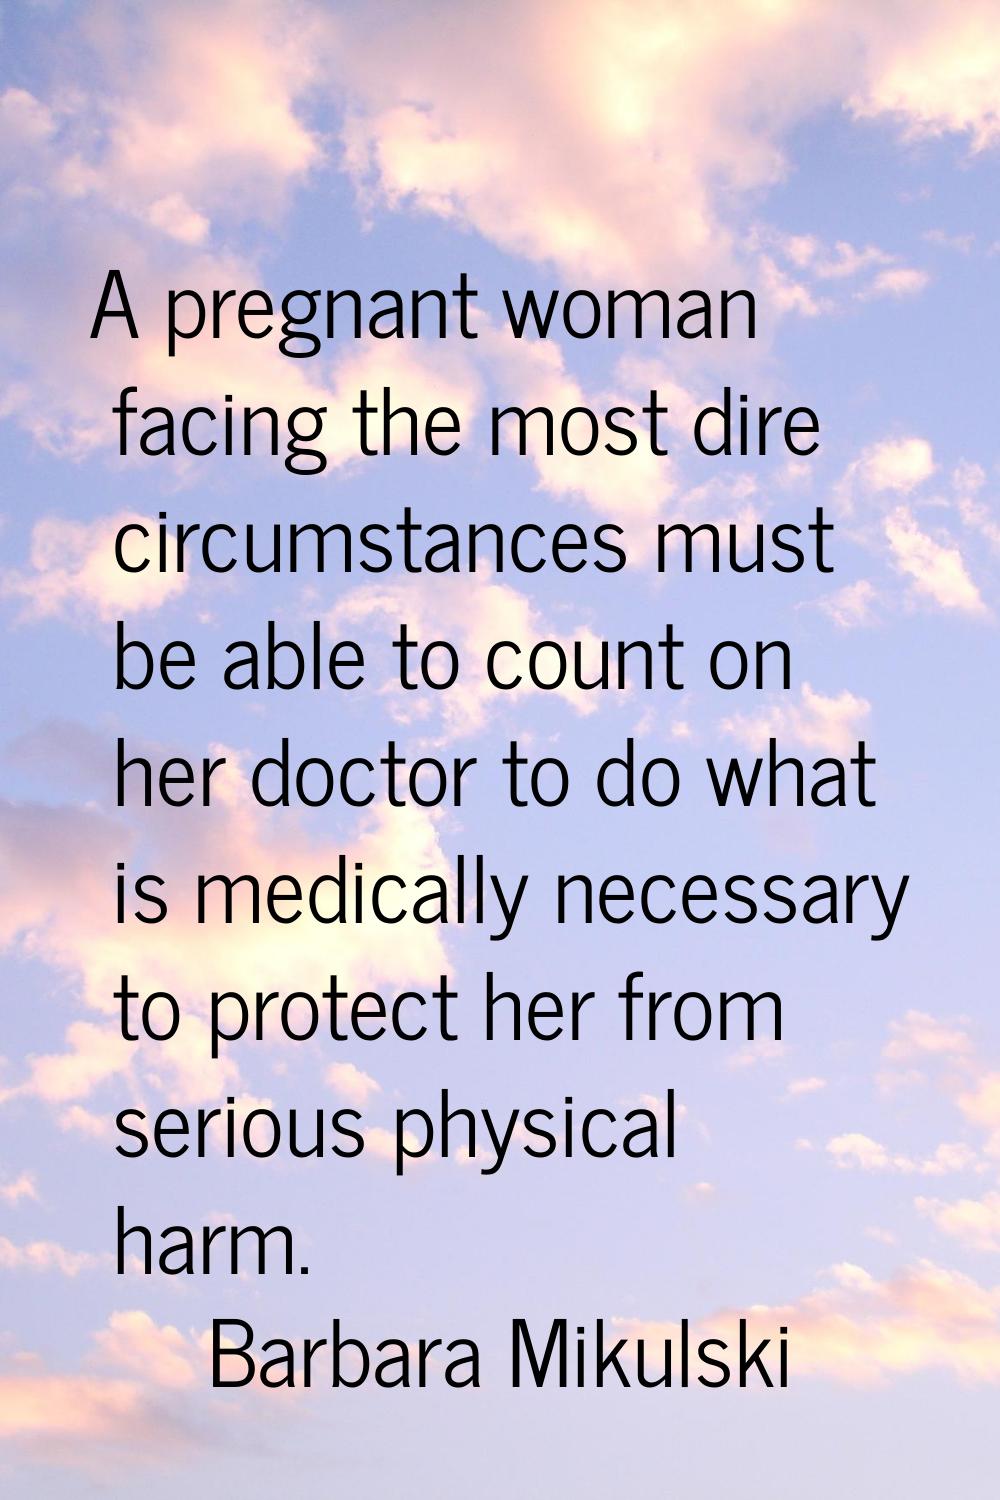 A pregnant woman facing the most dire circumstances must be able to count on her doctor to do what 